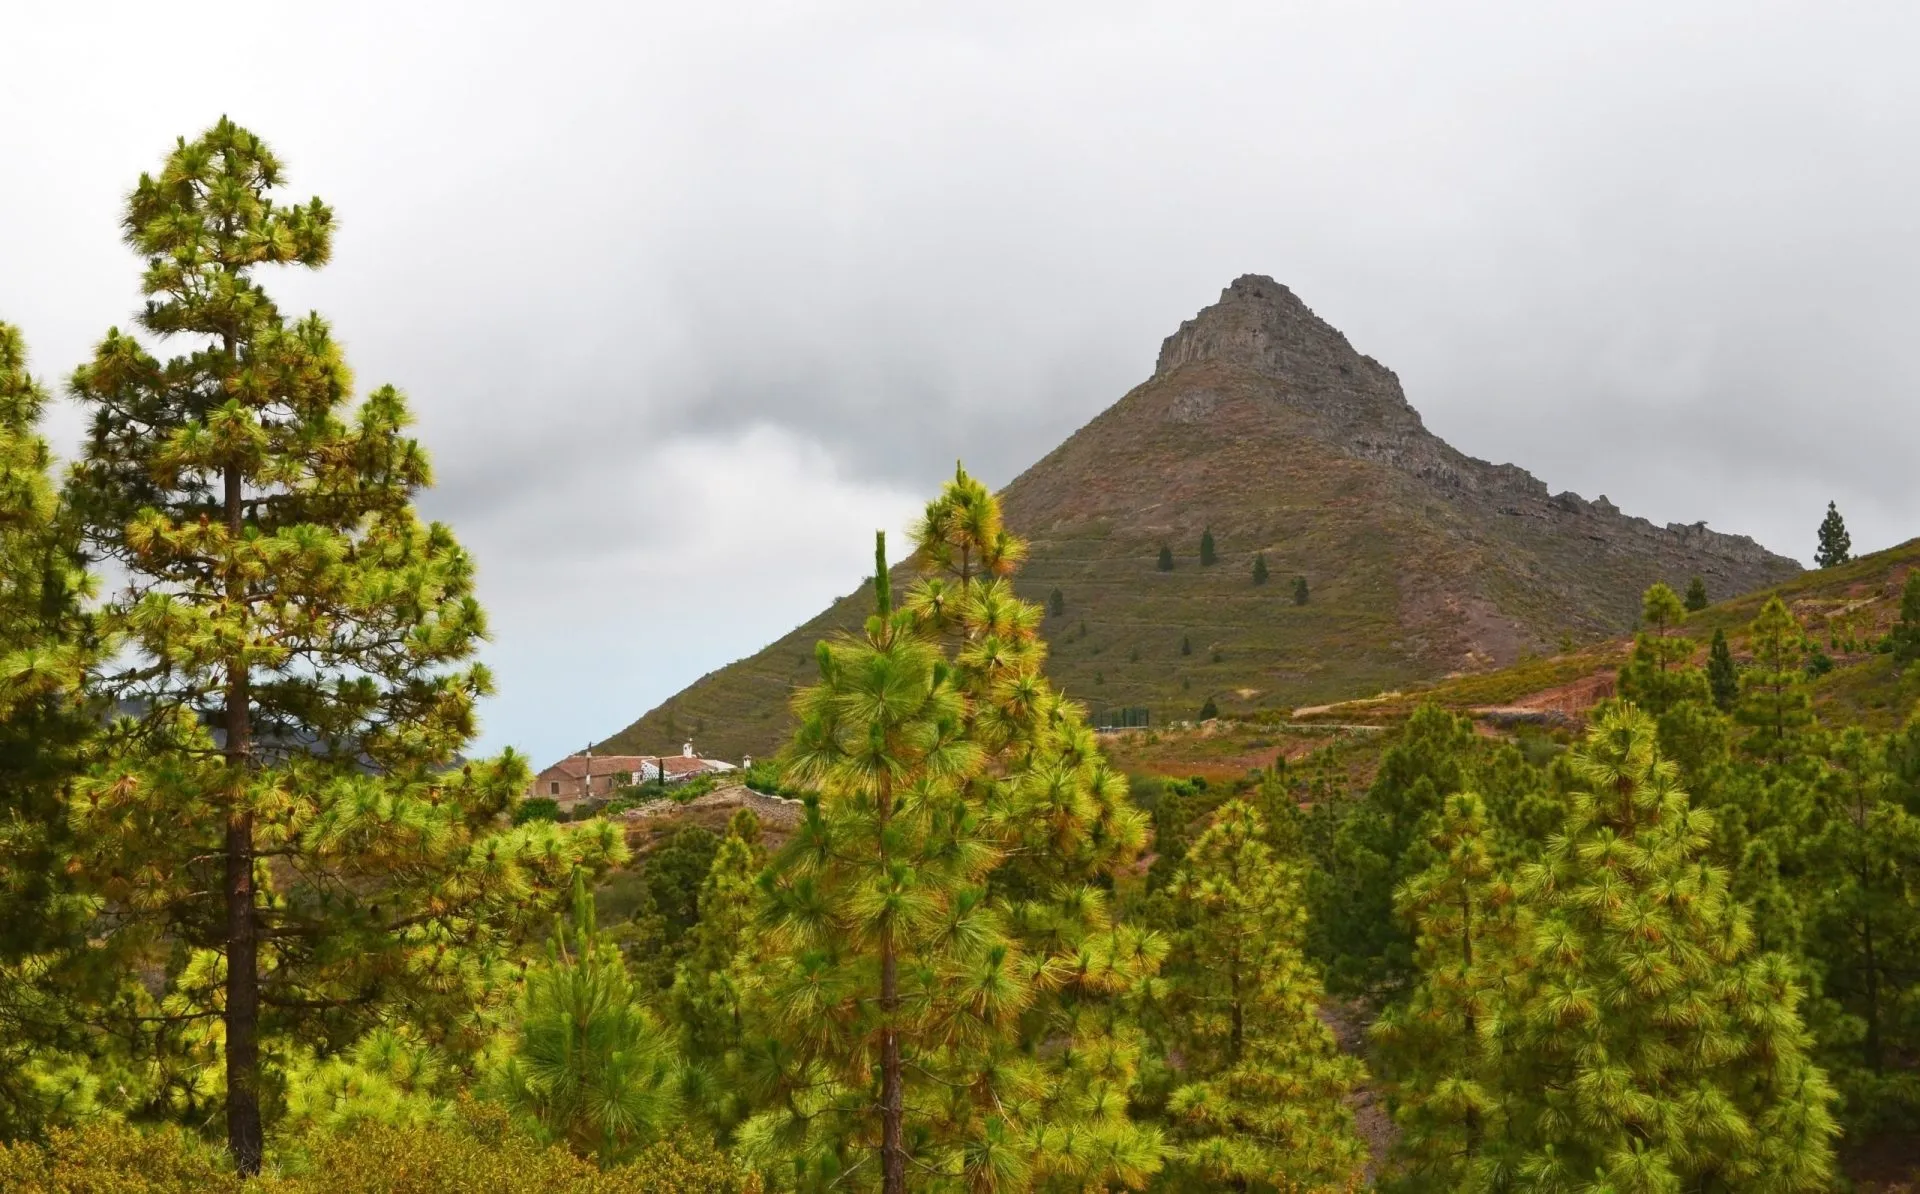 Beautiful view of the countryside around Imoque mountain with Canary pine trees in Ifonche,
Tenerife,Canary Islands,Spain.Selective focus.